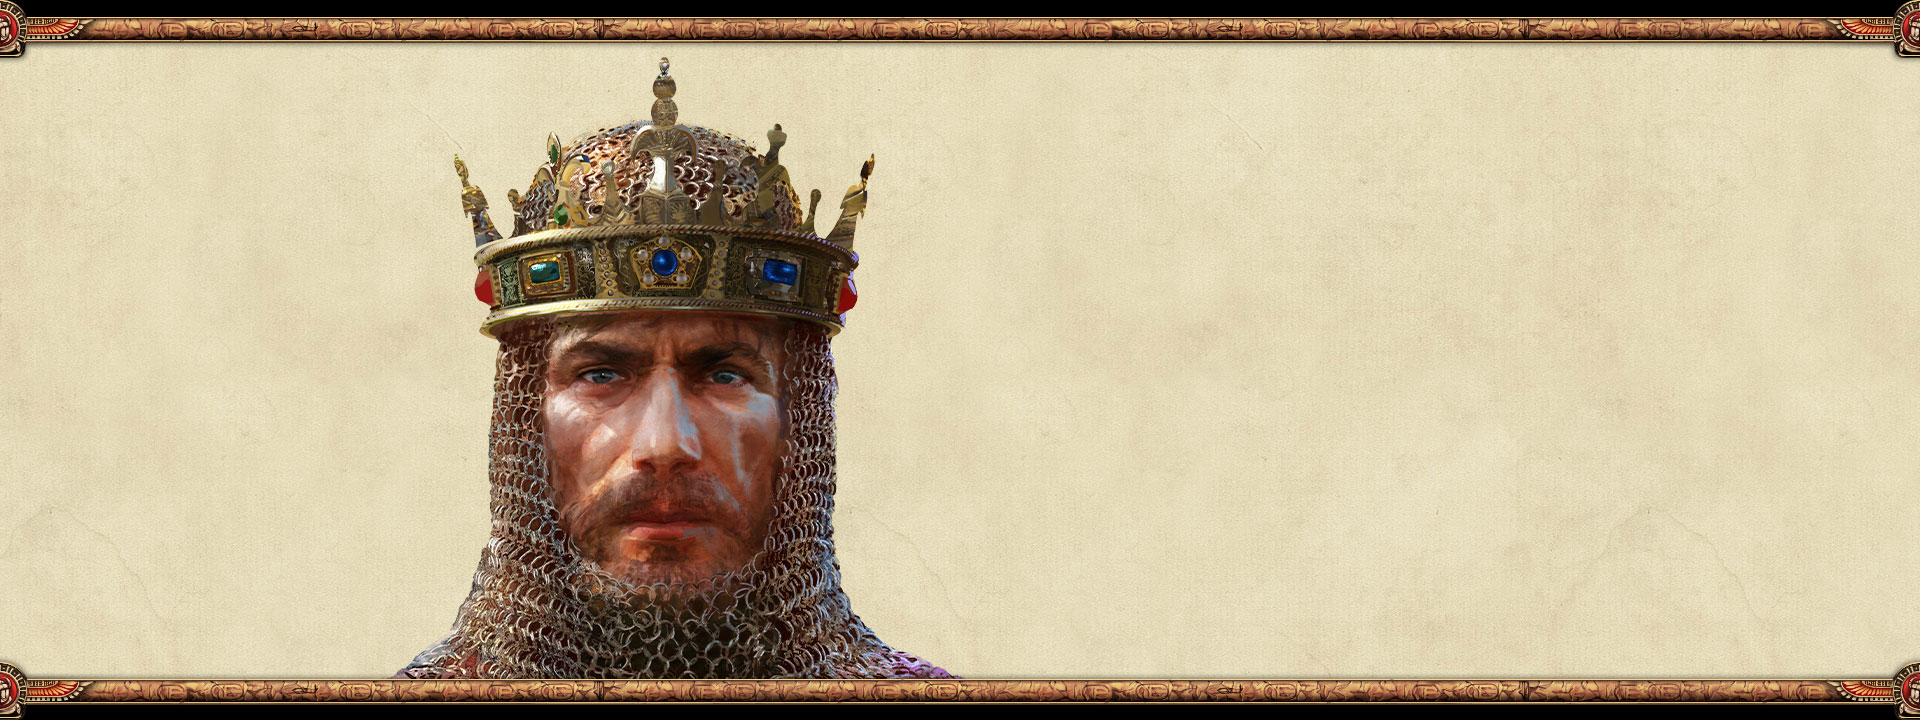 The ruler of an empire wearing chain mail and a crown